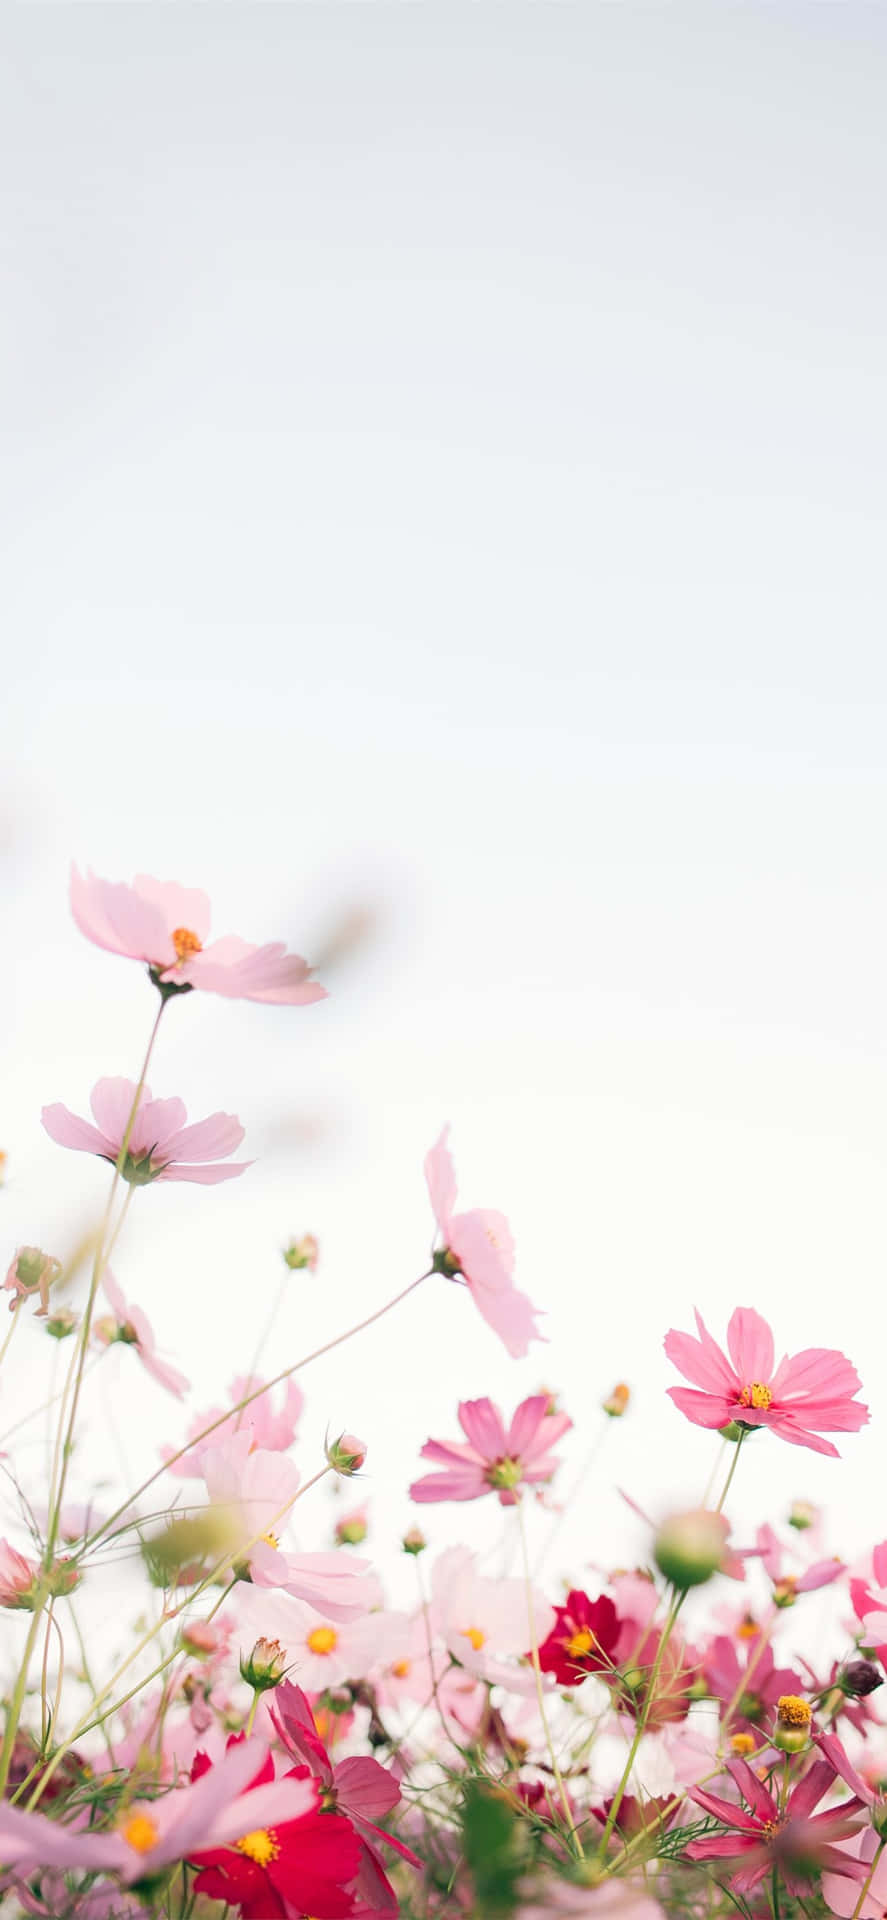 Cute Spring Clear Sky Iphone Wallpaper